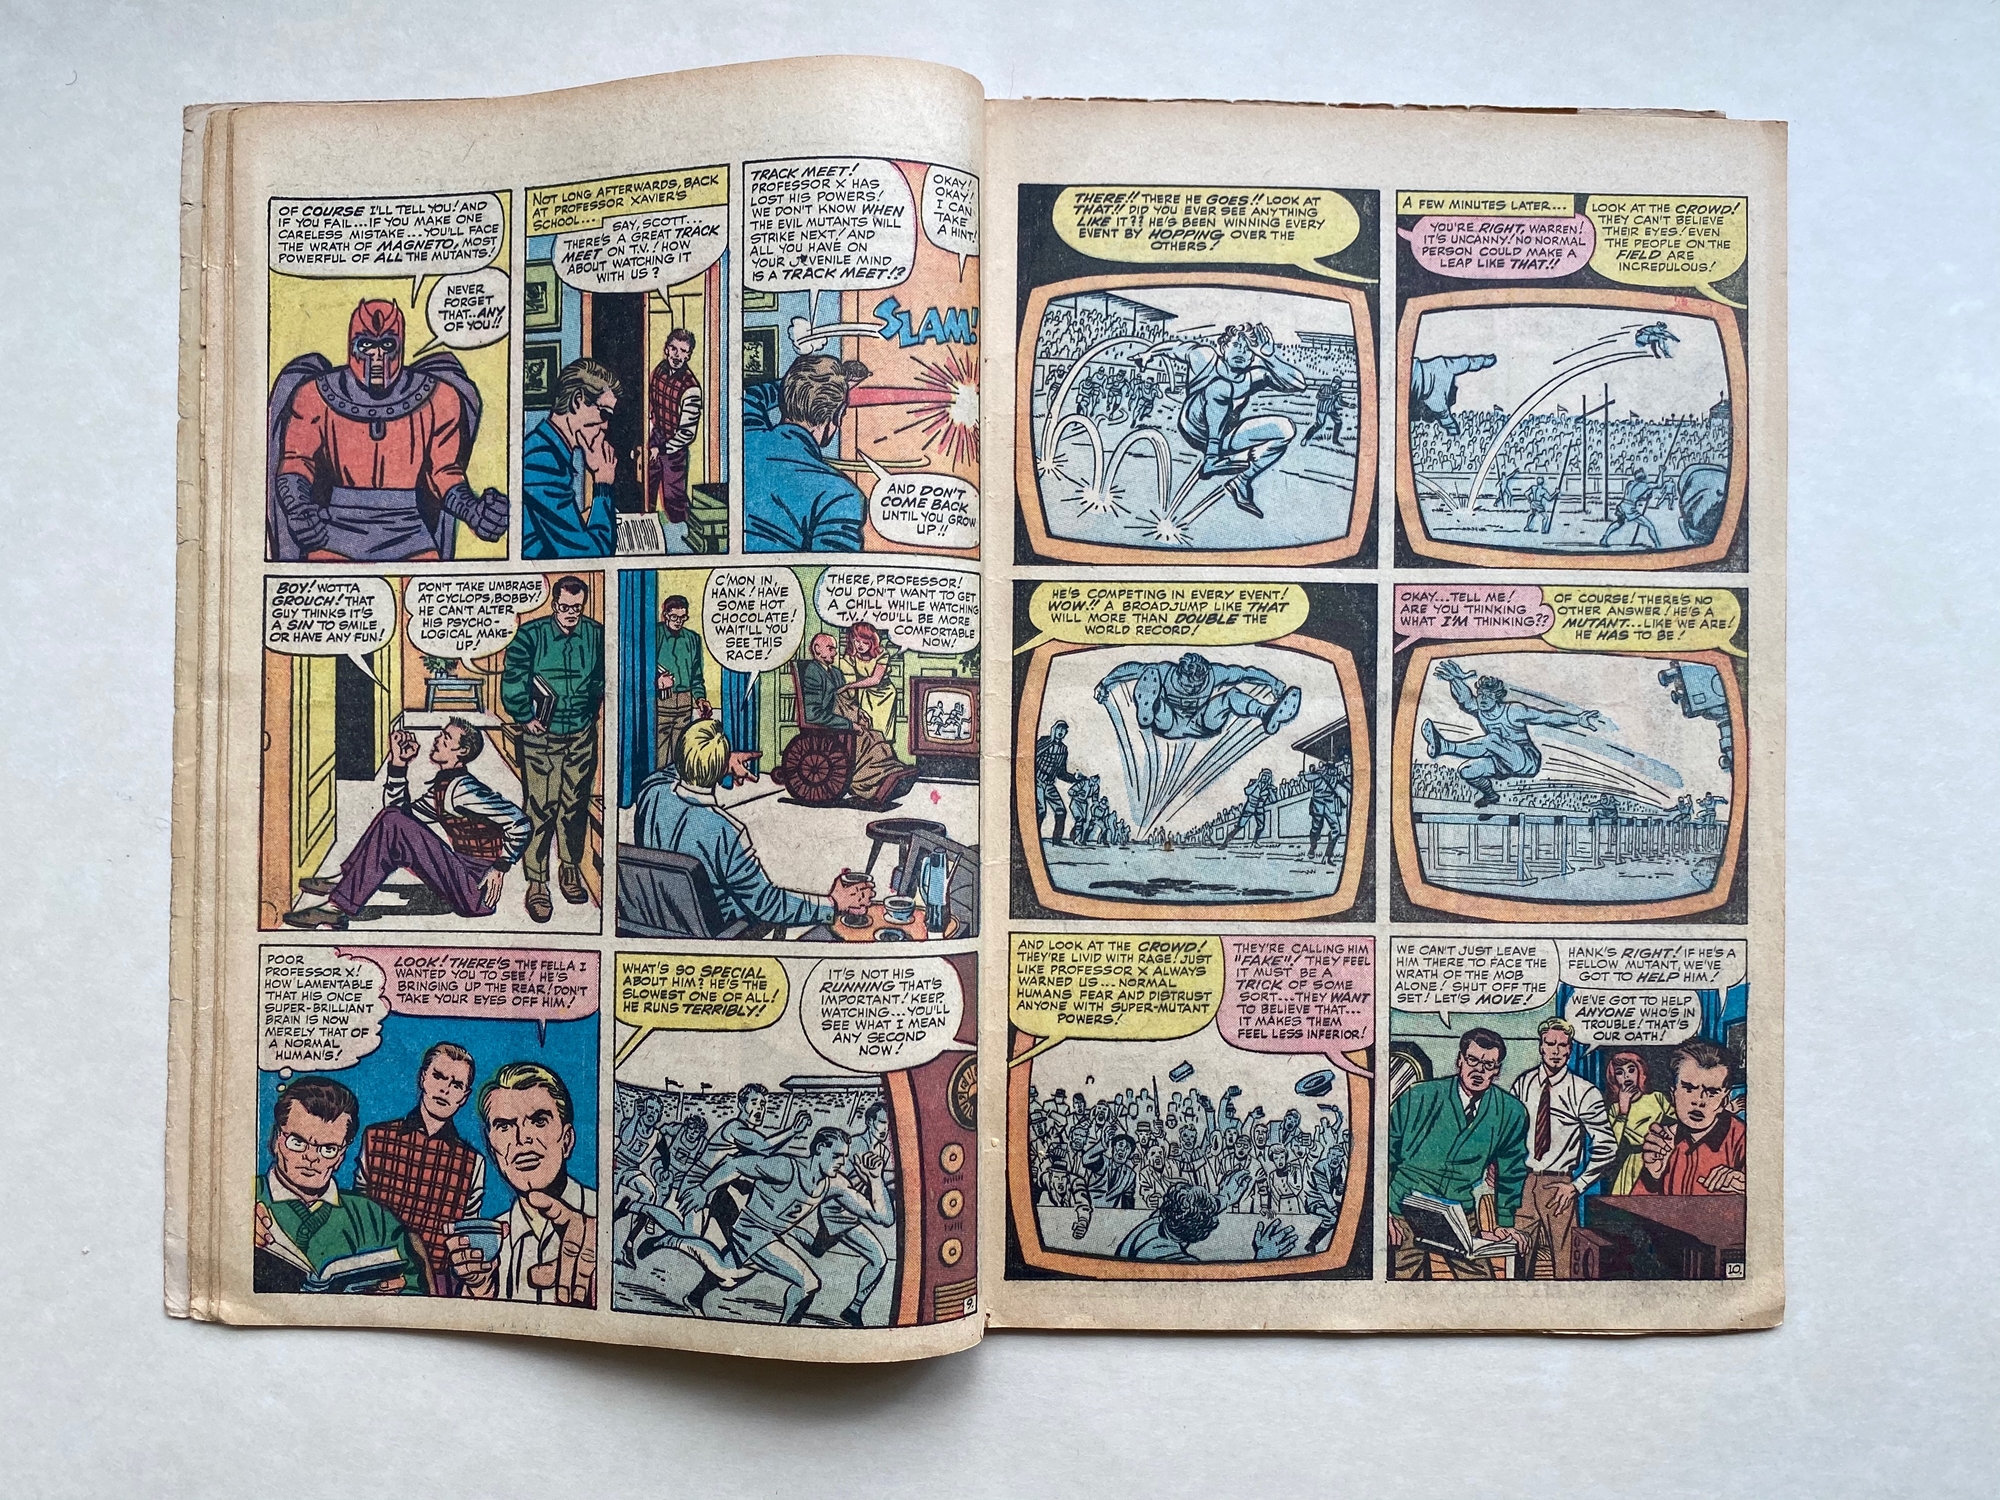 UNCANNY X-MEN #5 - (1964 - MARVEL - Pence Copy) - Third appearance of Magneto and the second - Image 7 of 10